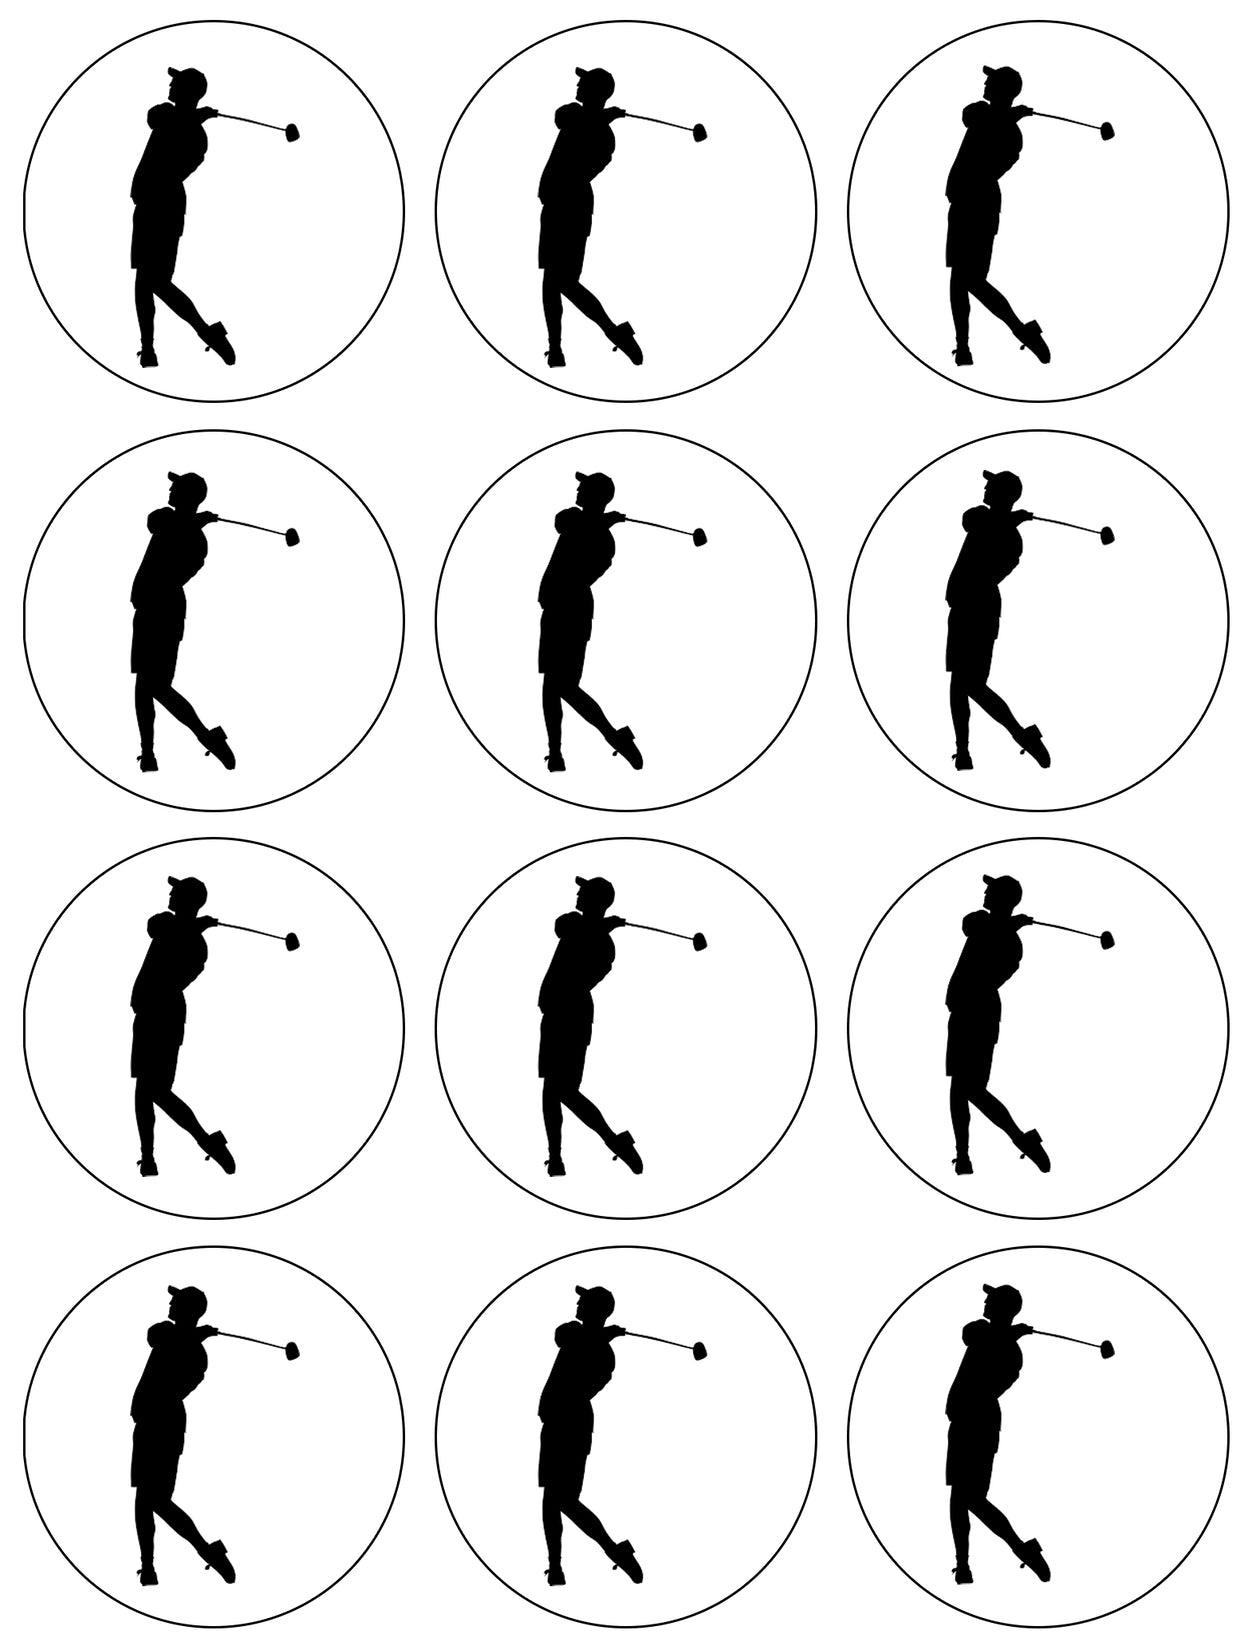 Golfing Golf Backswing Silhouette Edible Cupcake Topper Images ABPID55851